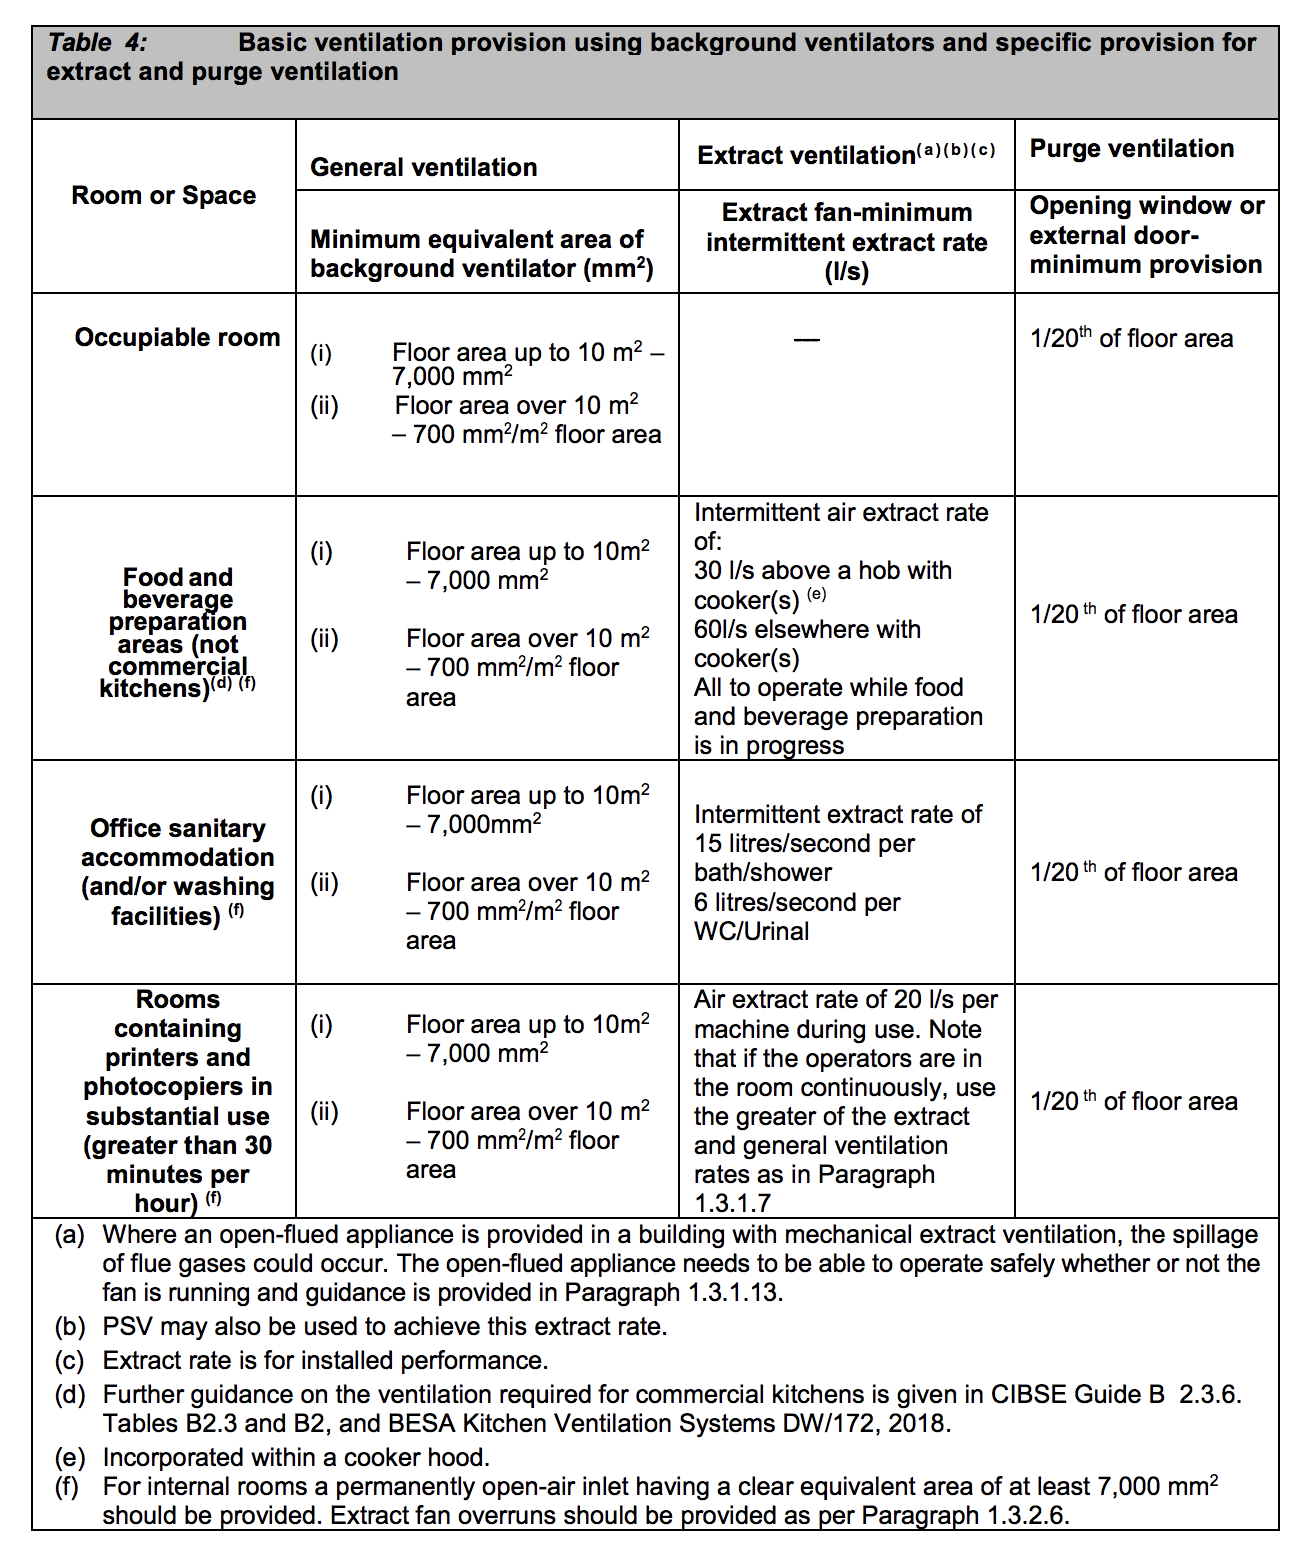 Table HF4 - Basic ventilation provision using background ventilators and specific provision for extract and purge ventilation - Extract from TGD F